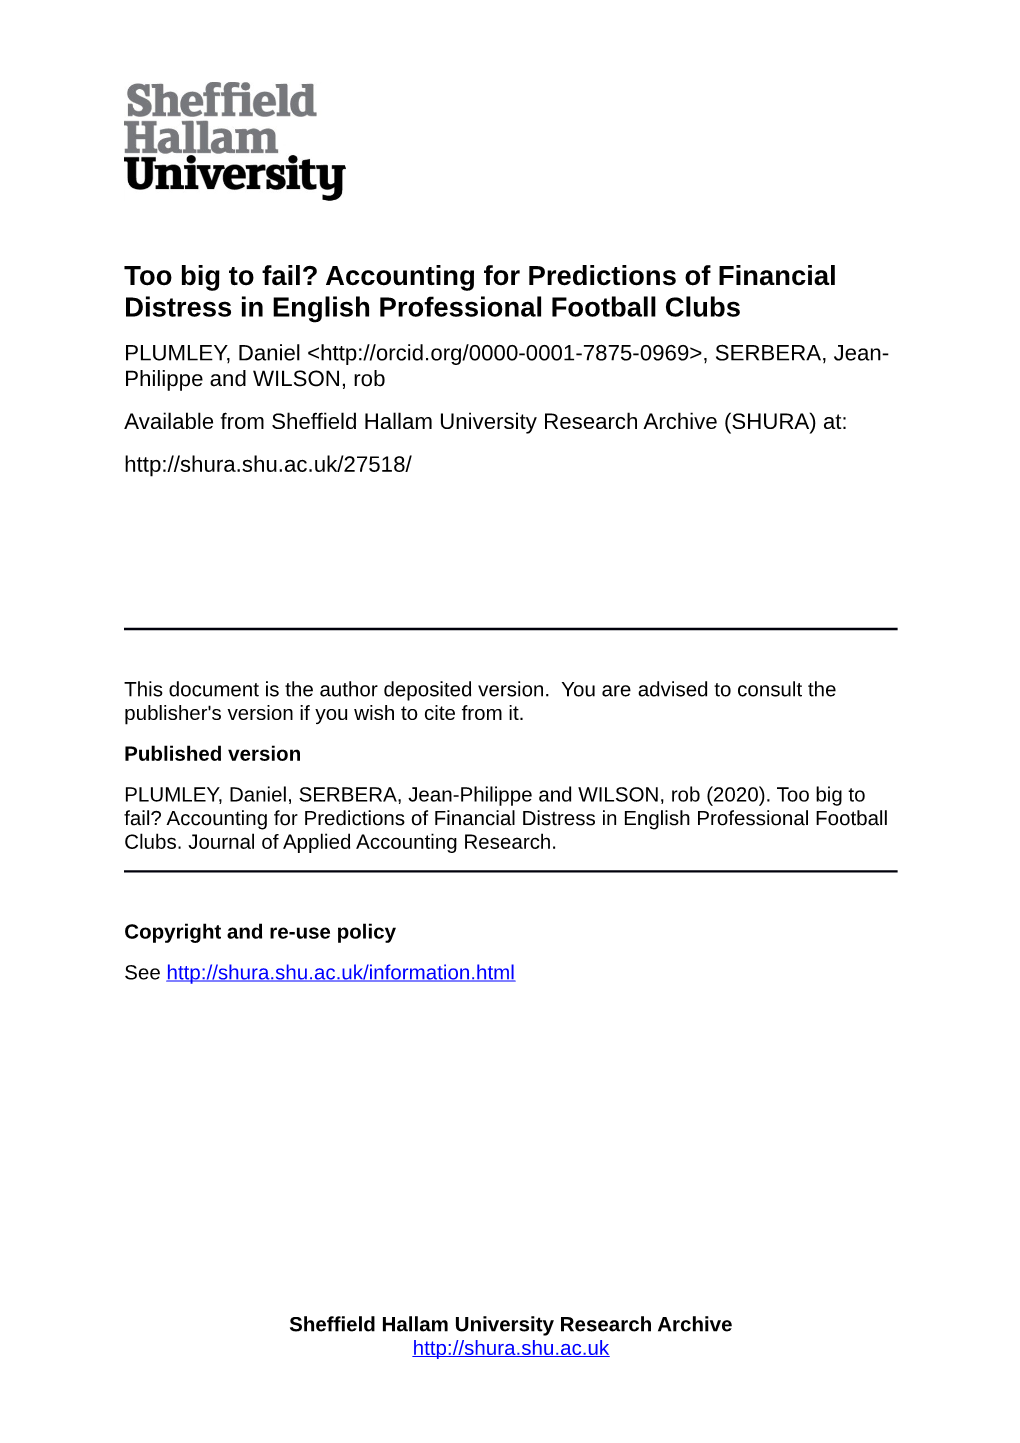 Too Big to Fail? Accounting for Predictions of Financial Distress In